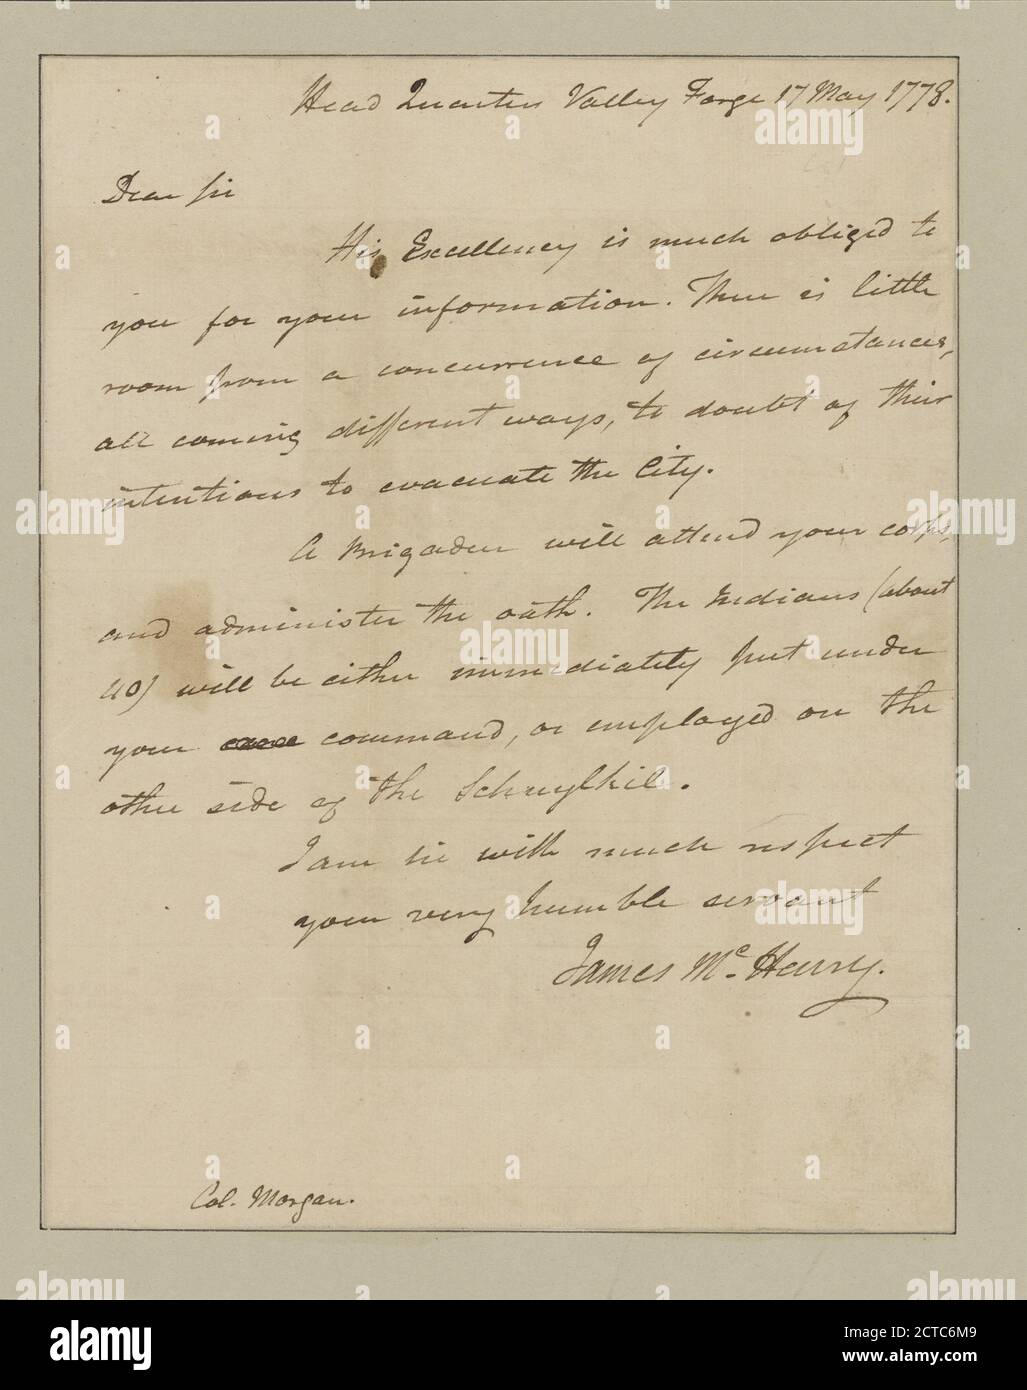 McHenry, James. Headquarters, Valley Forge. To Col. Daniel Morgan, text, Documents, 1778 Stock Photo